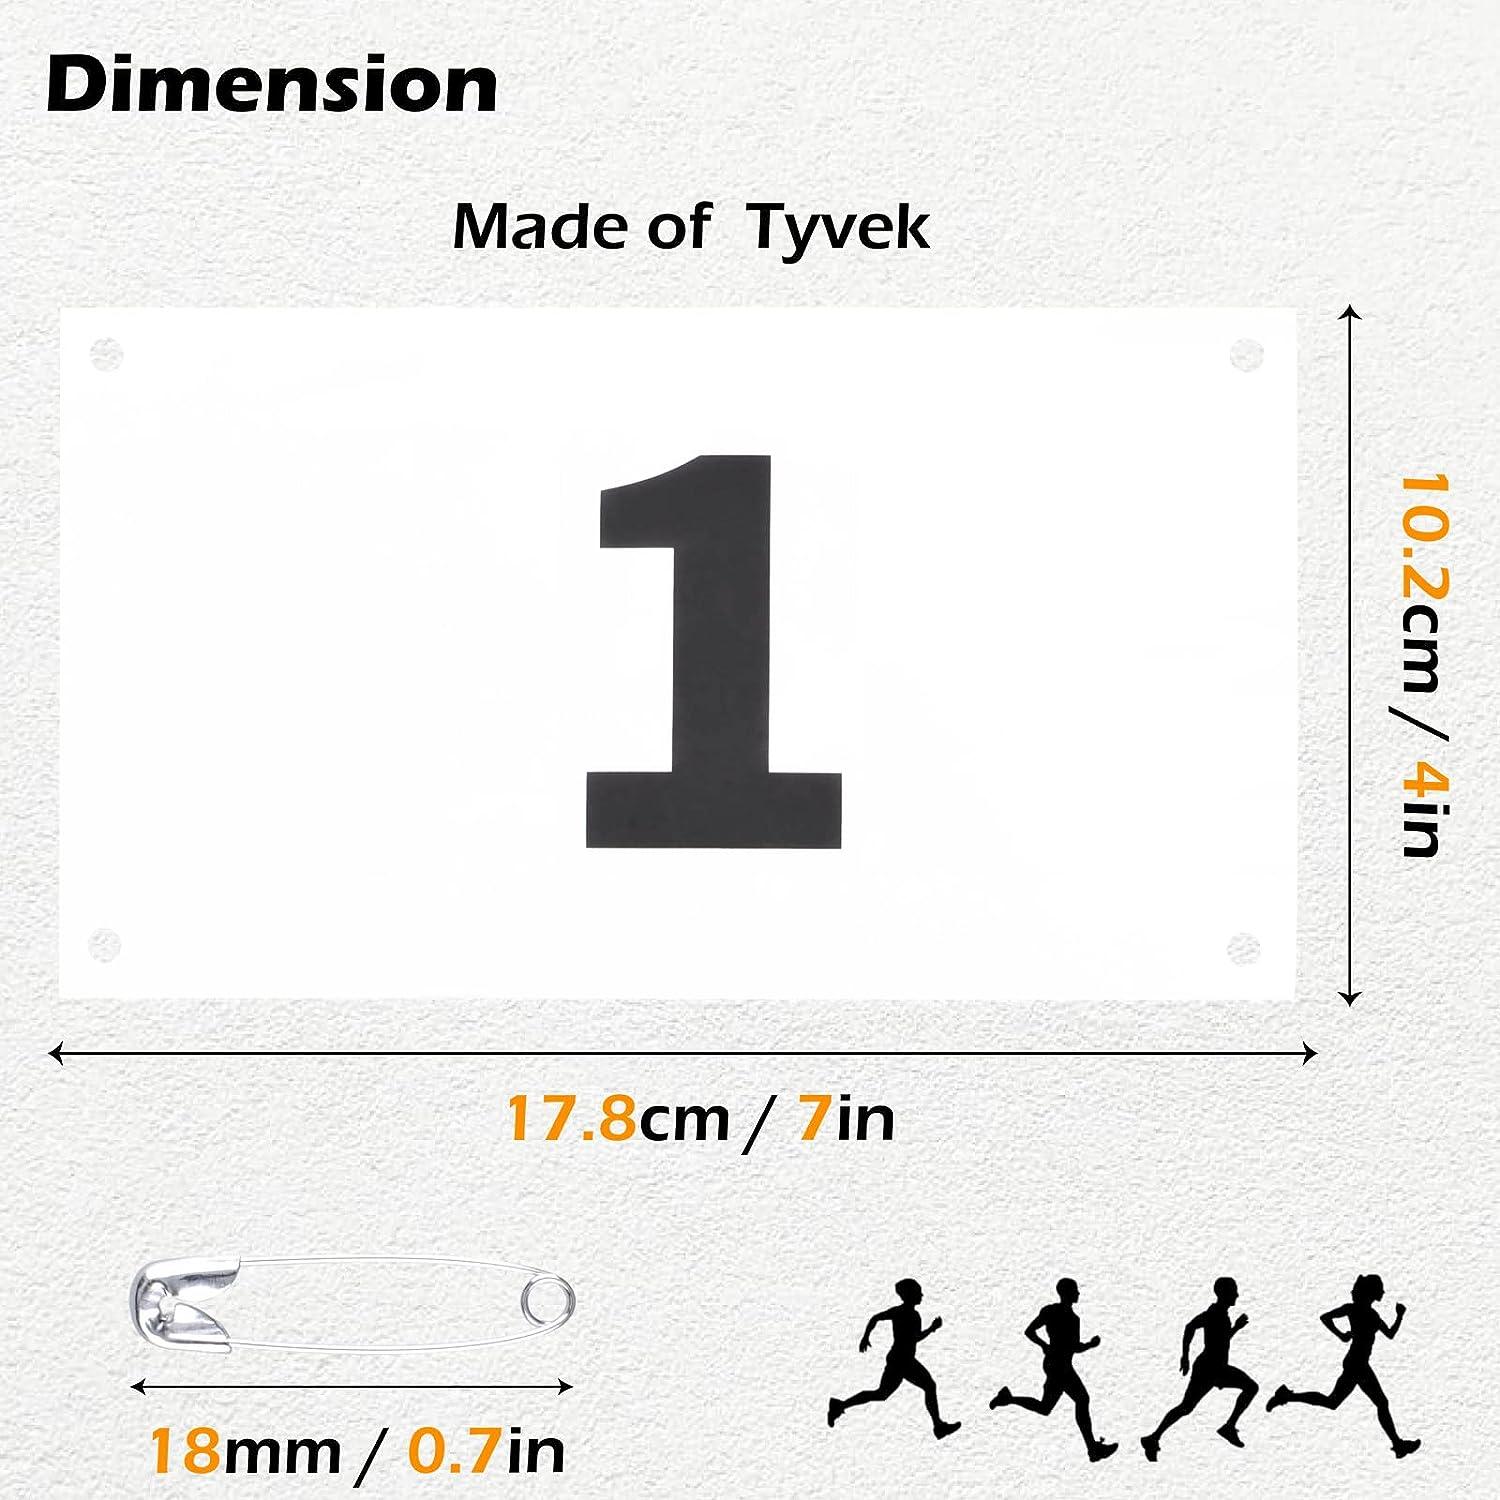  TRIWONDER Tyvek Running Bib Competitor Numbers with Safety  Pins, Running Numbers Paper Tags for Marathon Races (Colorful - Numbers  001-200) : Sports & Outdoors